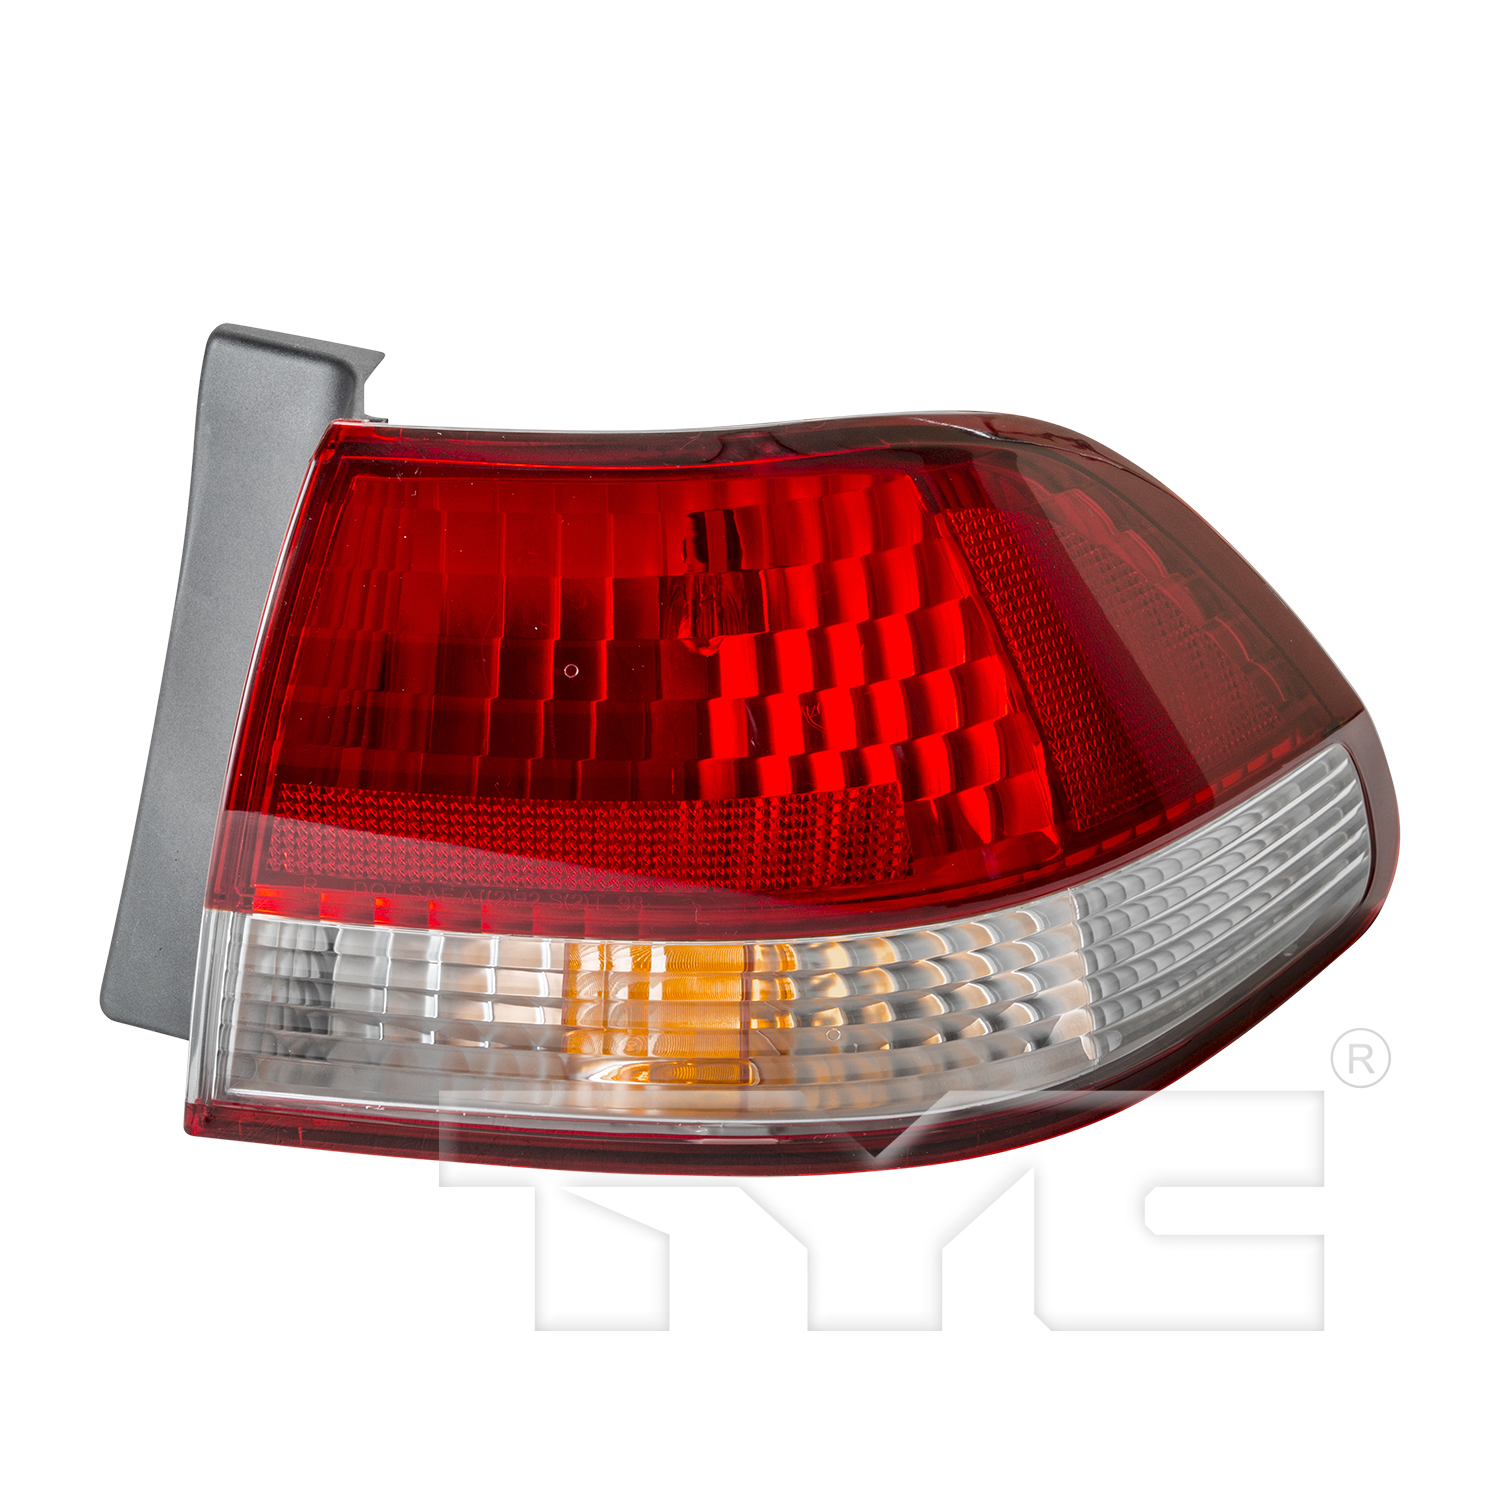 Aftermarket TAILLIGHTS for HONDA - ACCORD, ACCORD,01-02,RT Taillamp assy